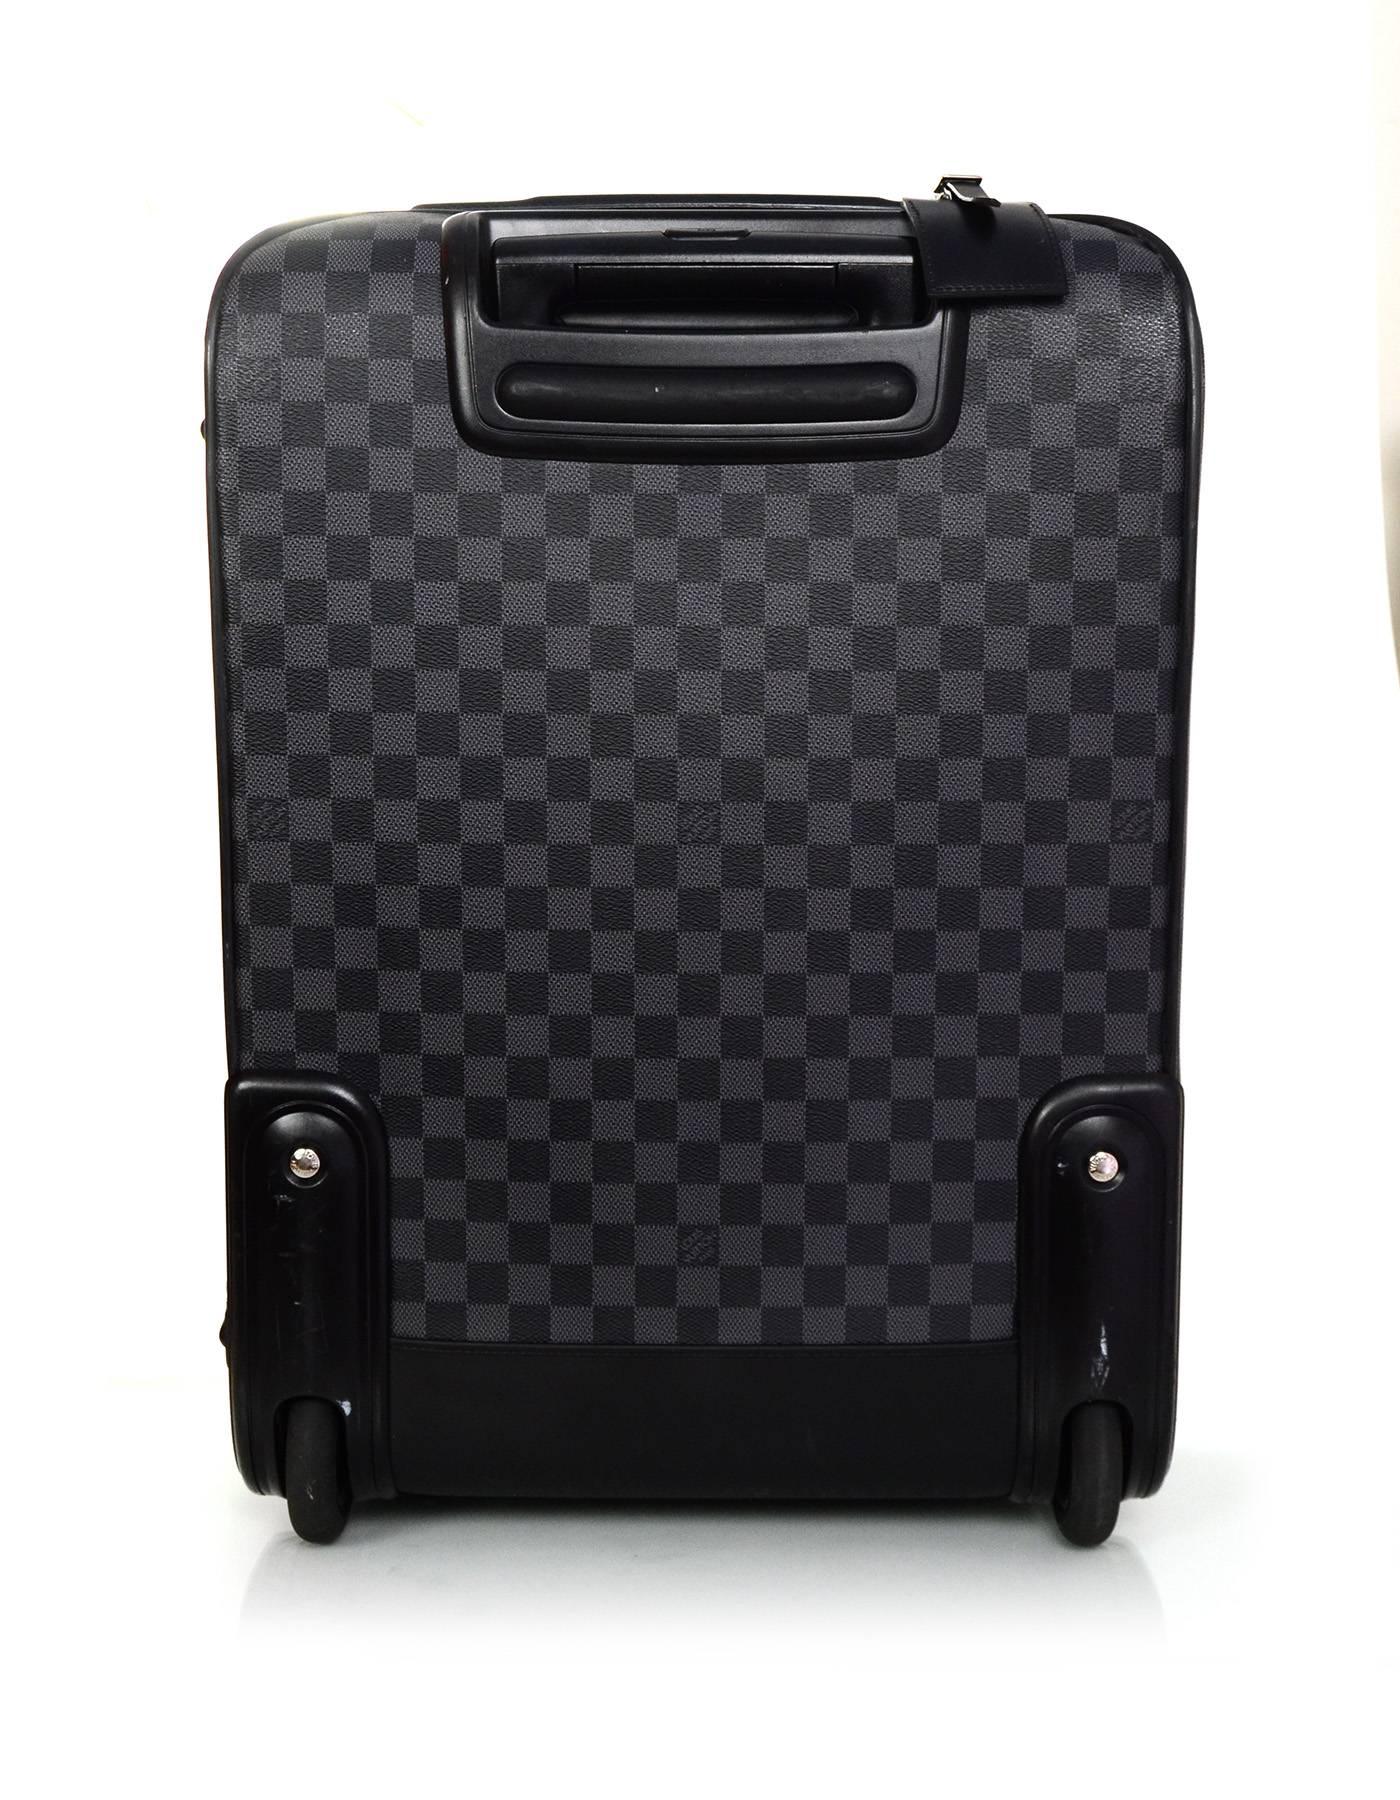 Louis Vuitton Graphite Damier Pegase Legere 55 Business Suitcase

Made In: France
Year of Production: 2013
Color: Black, grey
Hardware: Silvertone
Materials: Coated canvas, leather, metal
Lining: Black textile
Date Code/Serial Number: